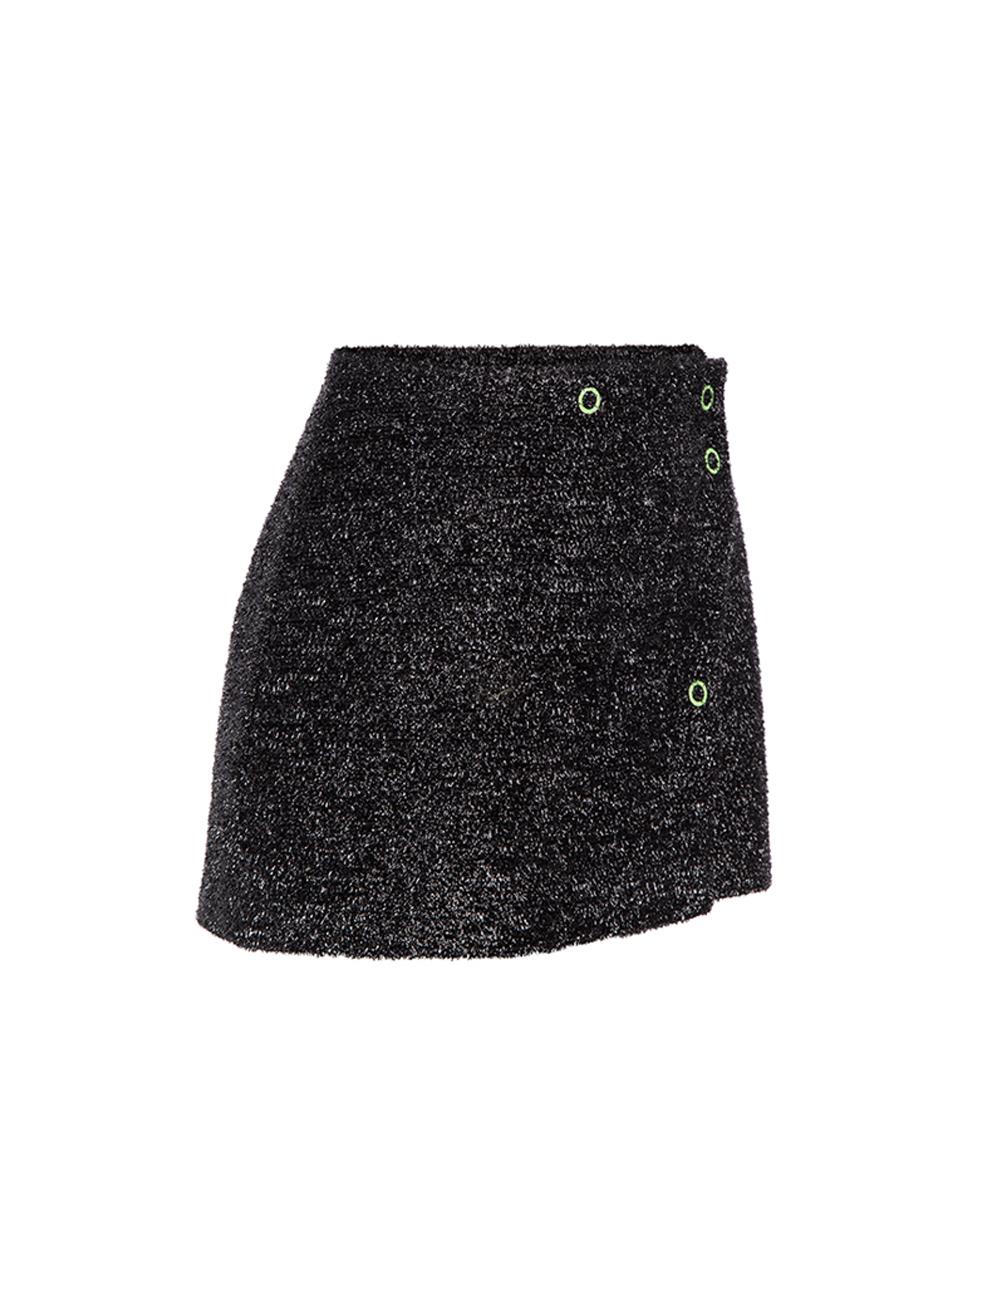 CONDITION is Never worn, with tags. No visible wear to skirt is evident on this new Ganni designer resale item.

Details
Black
Synthetic
Mini skirt
Form fitting
Button detail
Front button fastening
Silk lining

Made in China

Composition
No